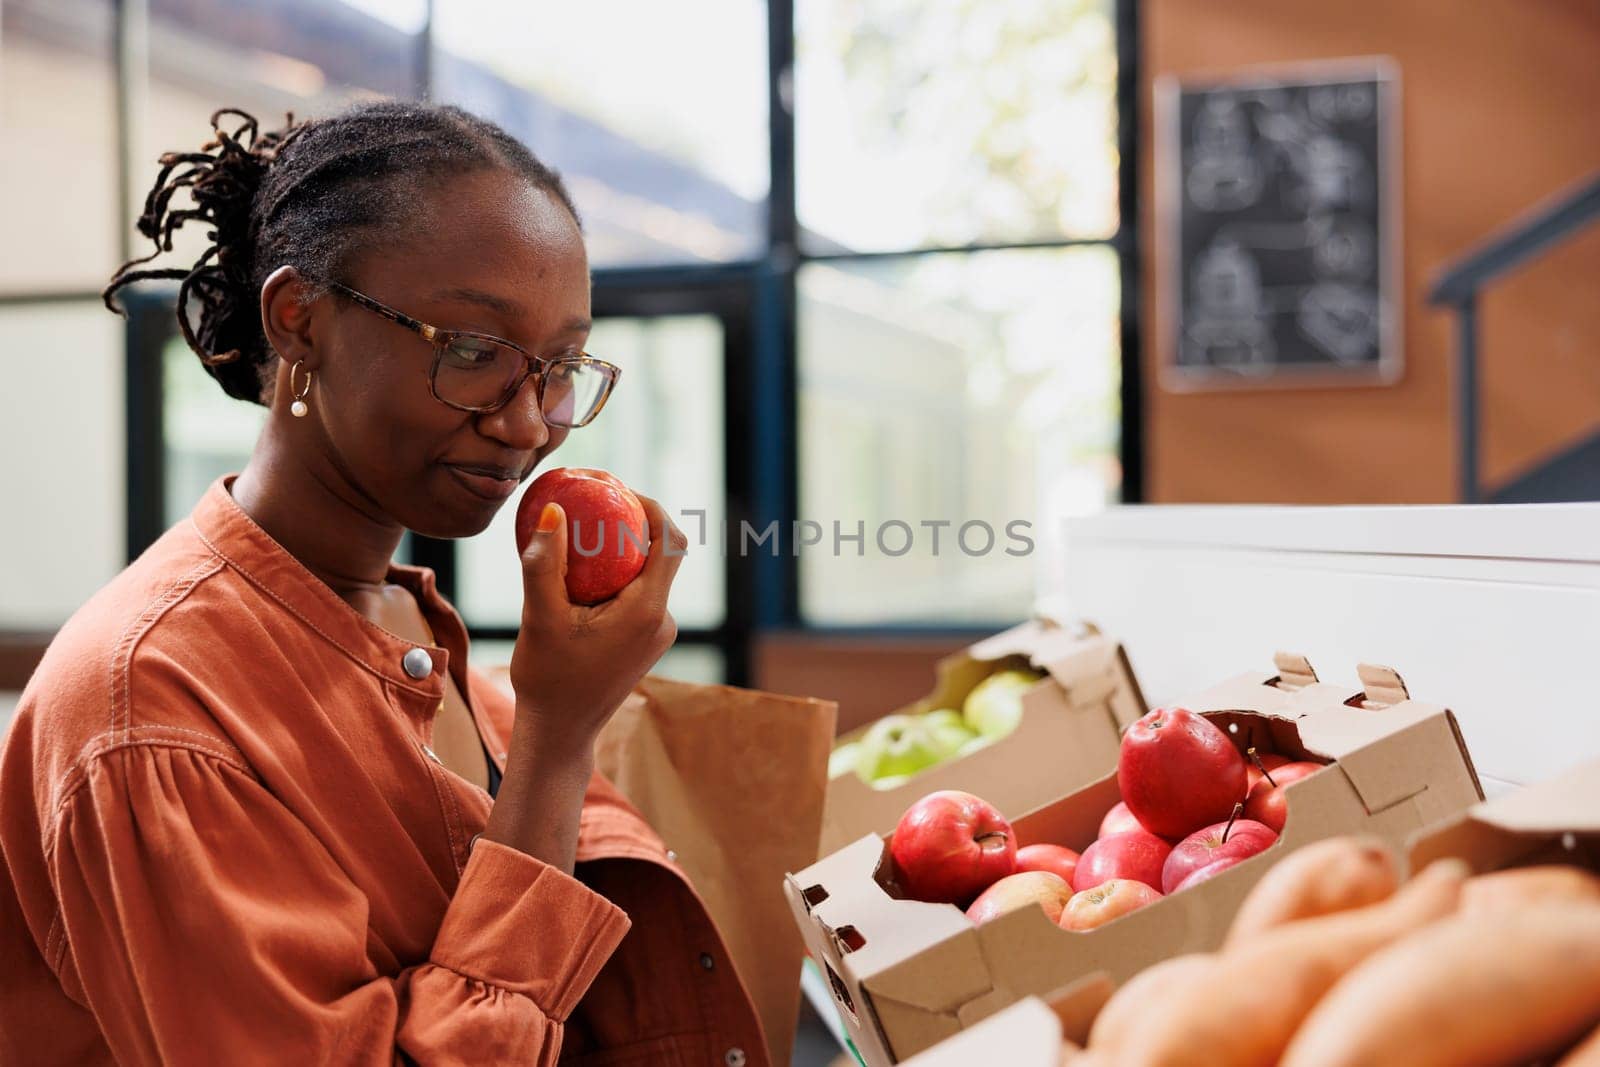 Customer smells fresh red apple in store by DCStudio